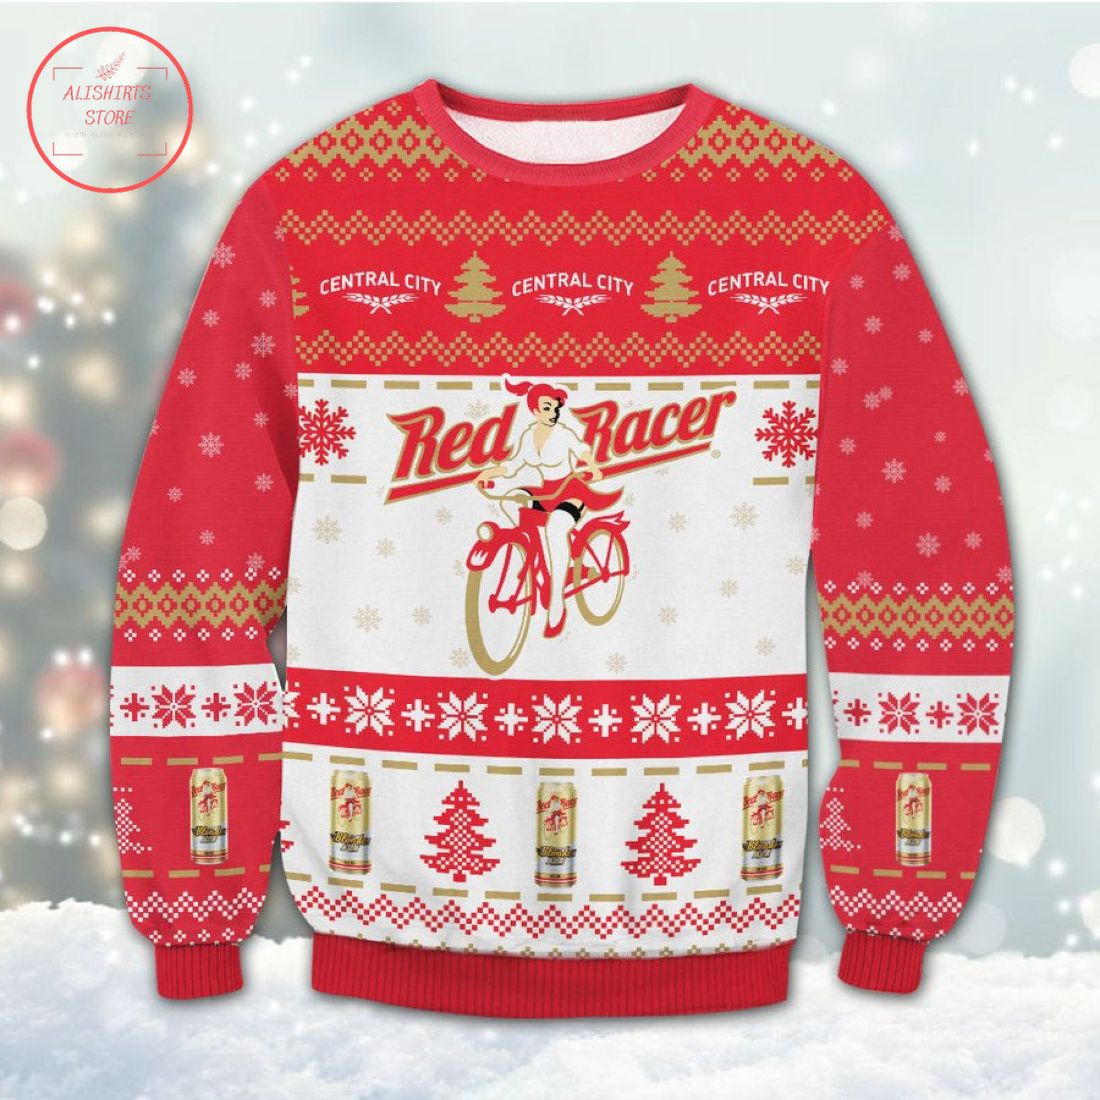 Red Racer Ipa Ugly Christmas Sweater